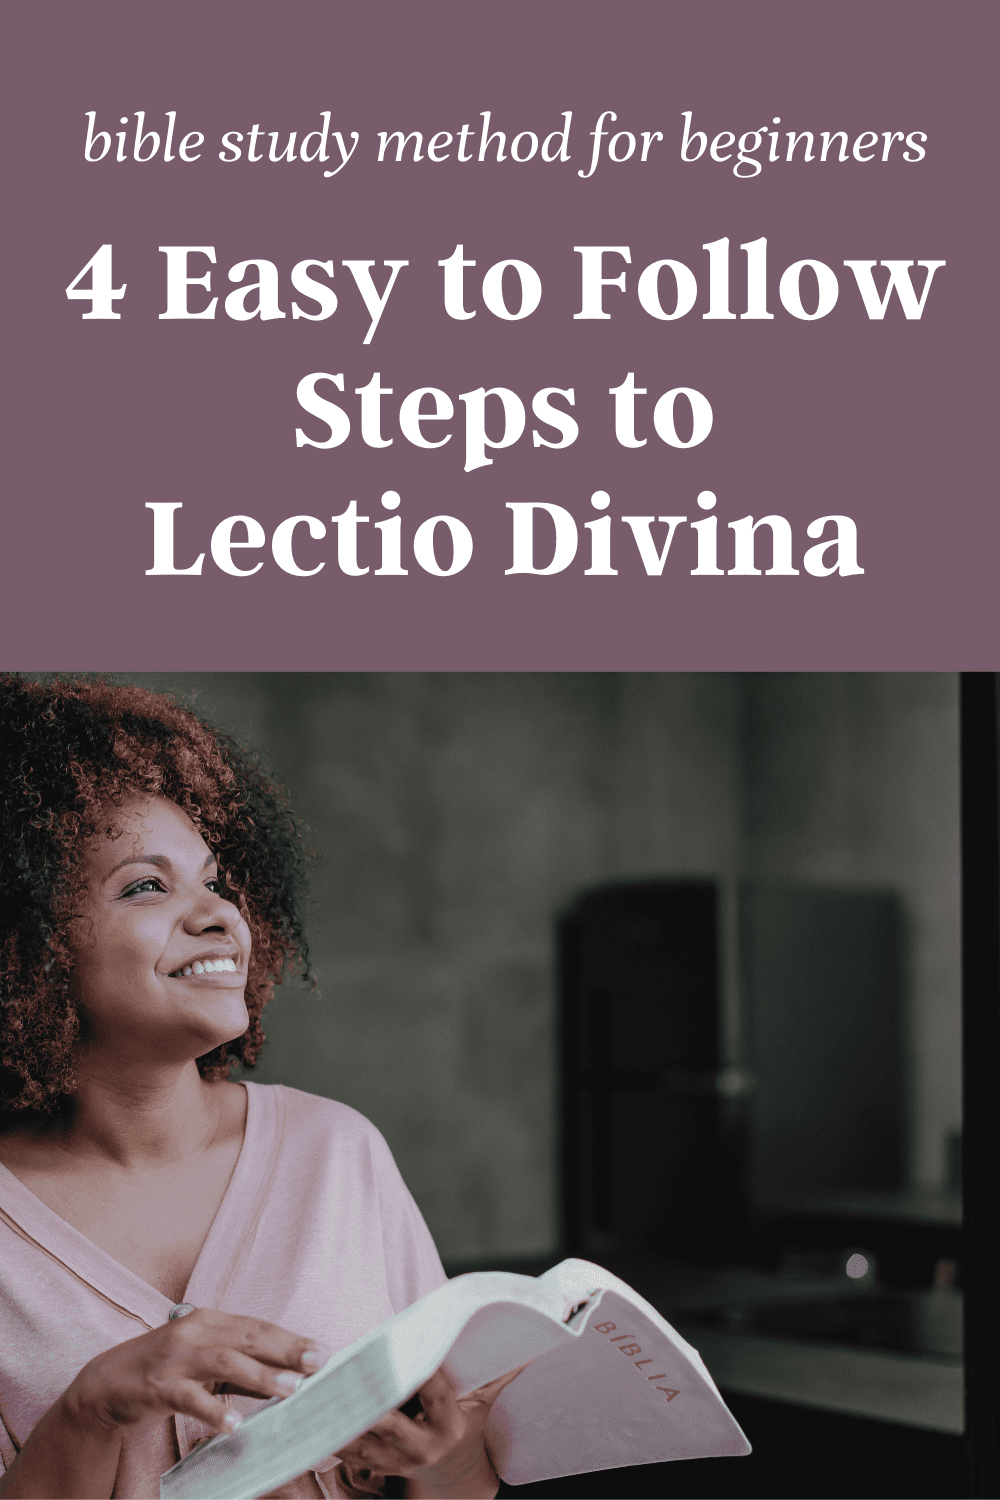 Are you ready to experience scripture in a whole new way? Learn the 4 steps to Lectio Divina and how to study the bible - without having to feel bored or like you aren't sure what to do. Plus, tips about how this bible study method is great for beginners and a way to include prayer in your quiet time with God.